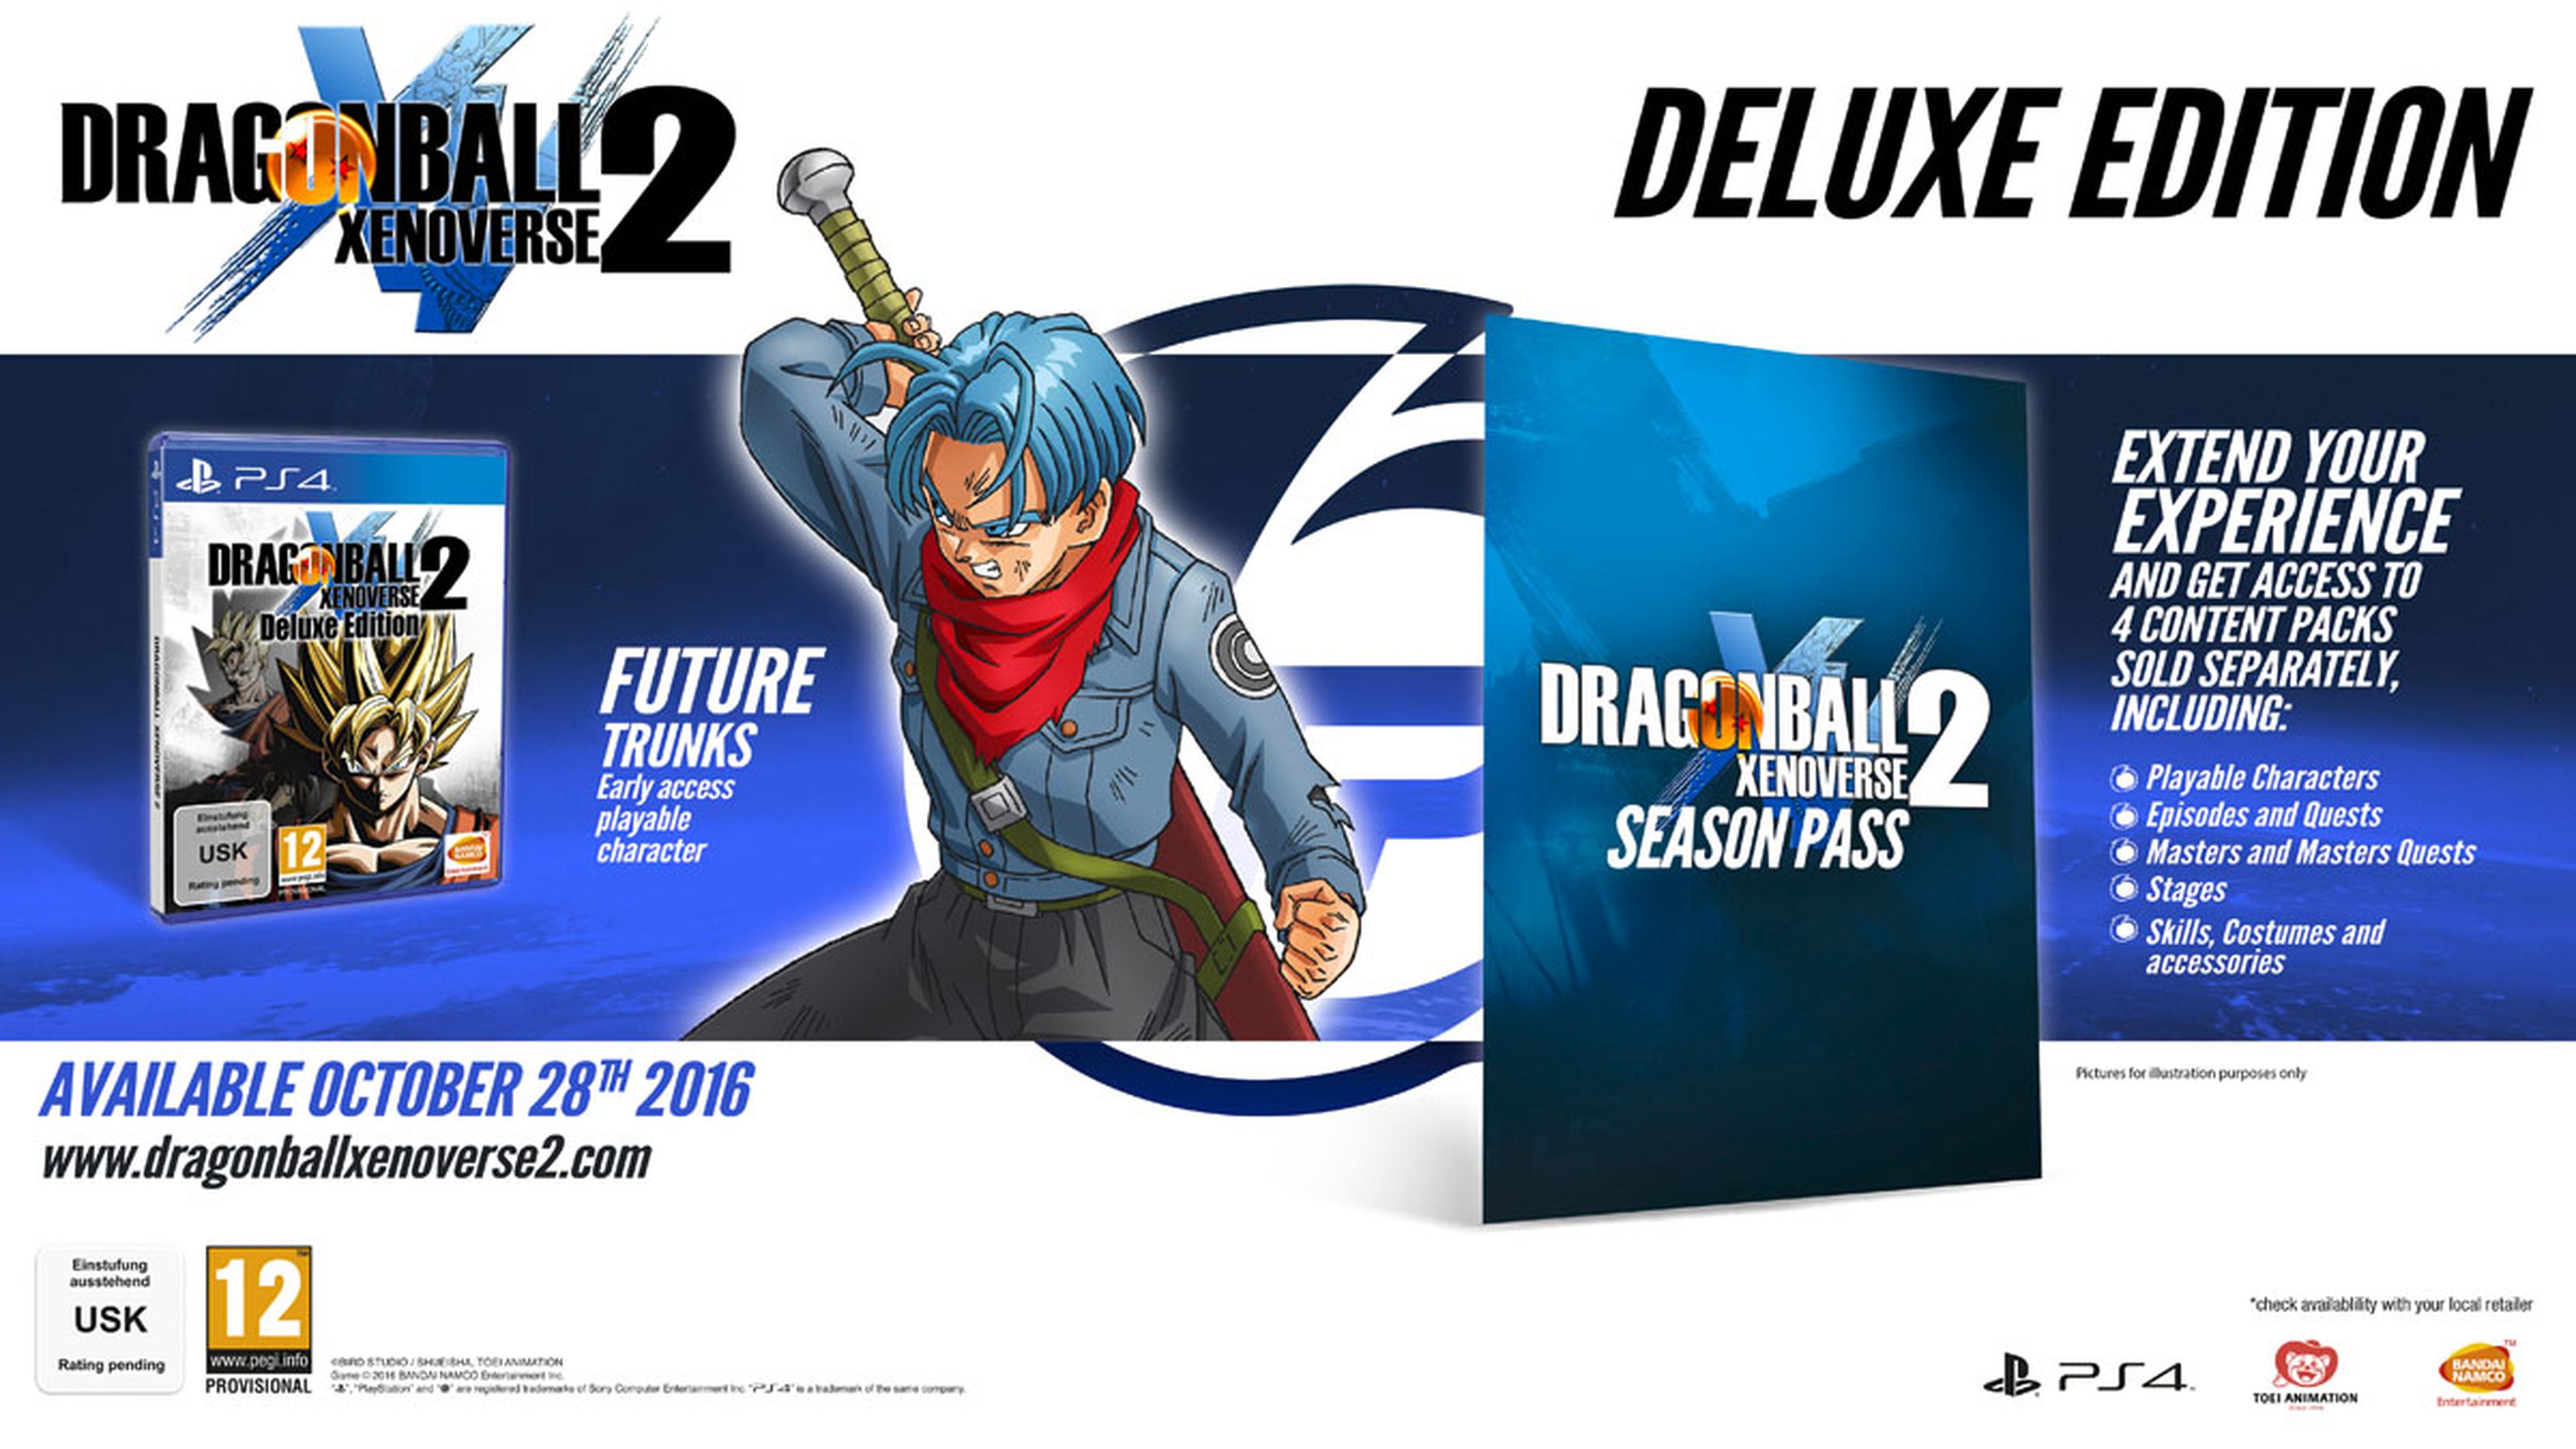 DB Xenoverse 2 - Deluxe Edition